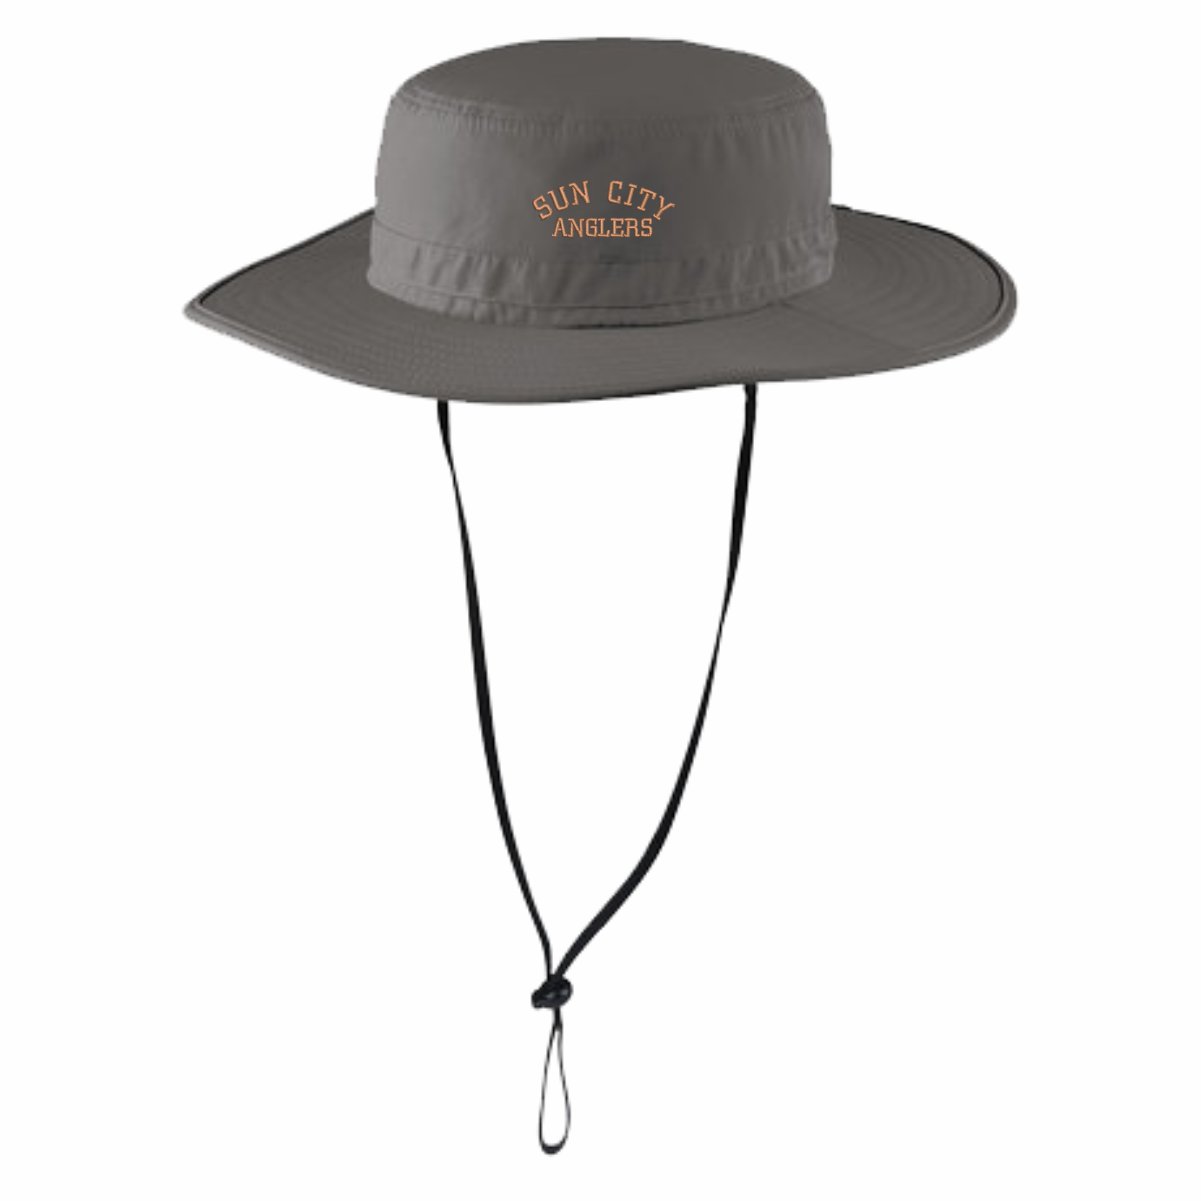 Sun City Anglers Port Authority Outdoor Wide-Brim Hat | HyperStitch, Inc